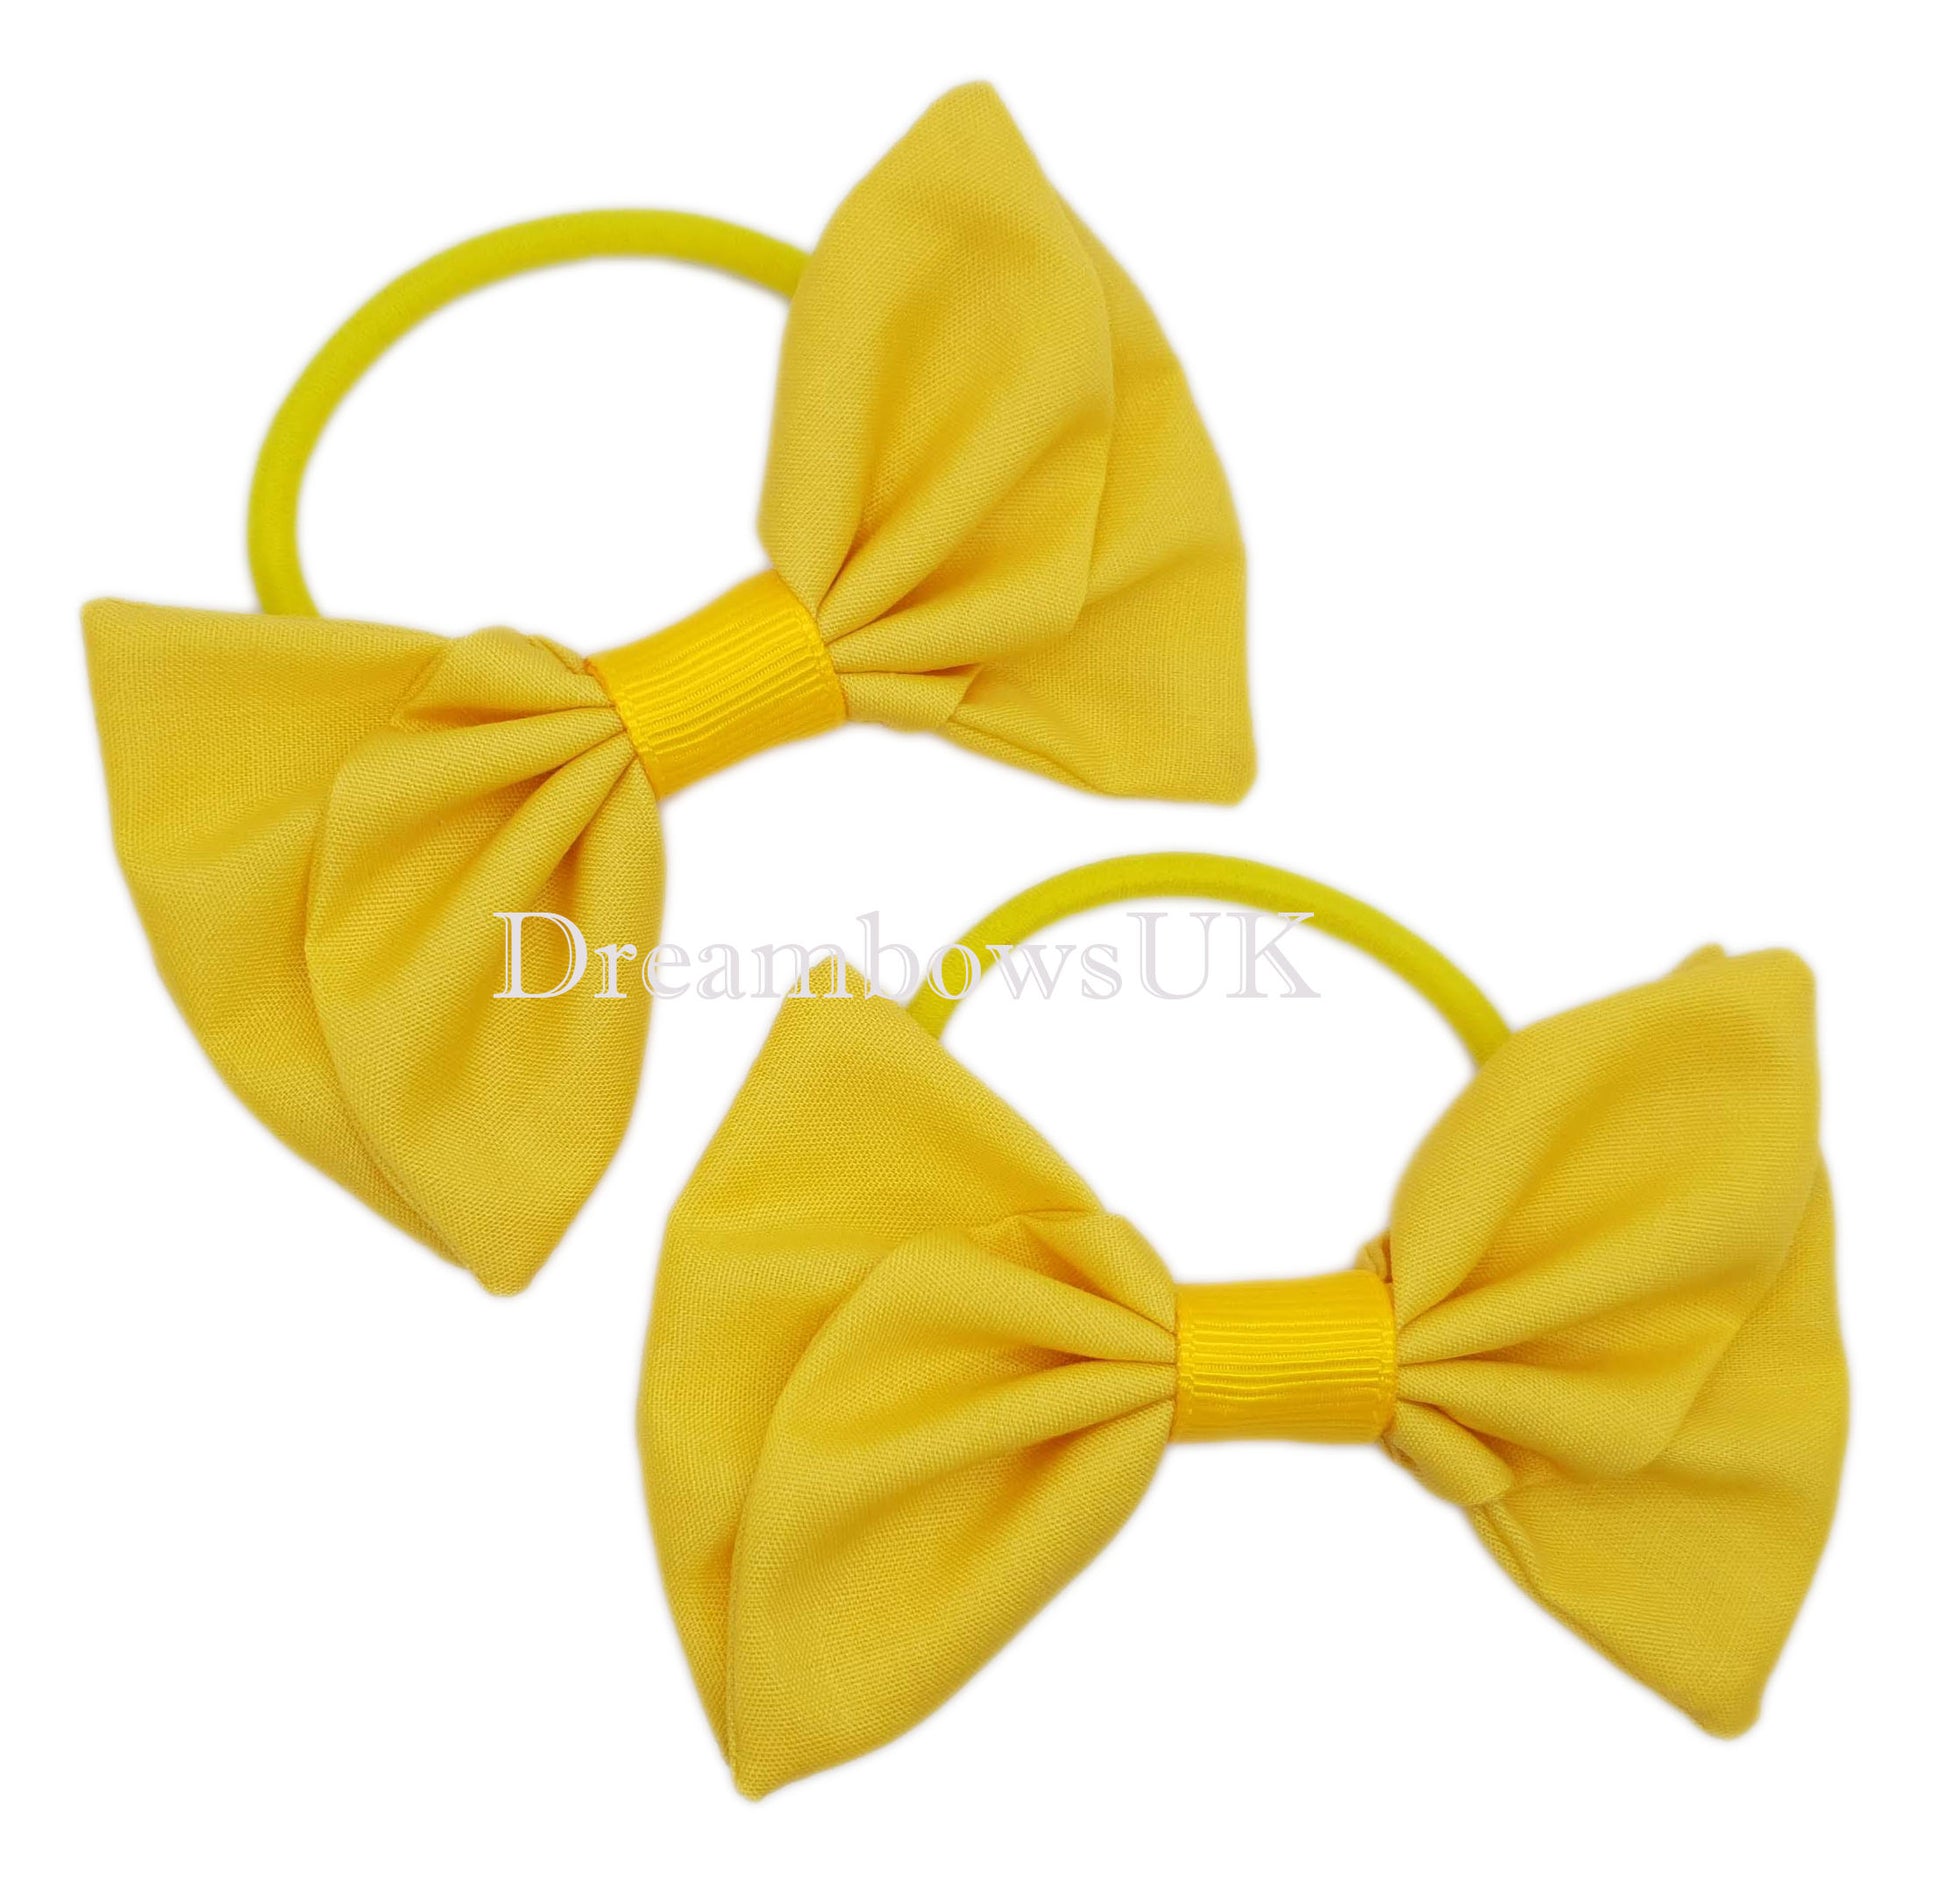 Golden yellow girls school bows on thick hair bobbles